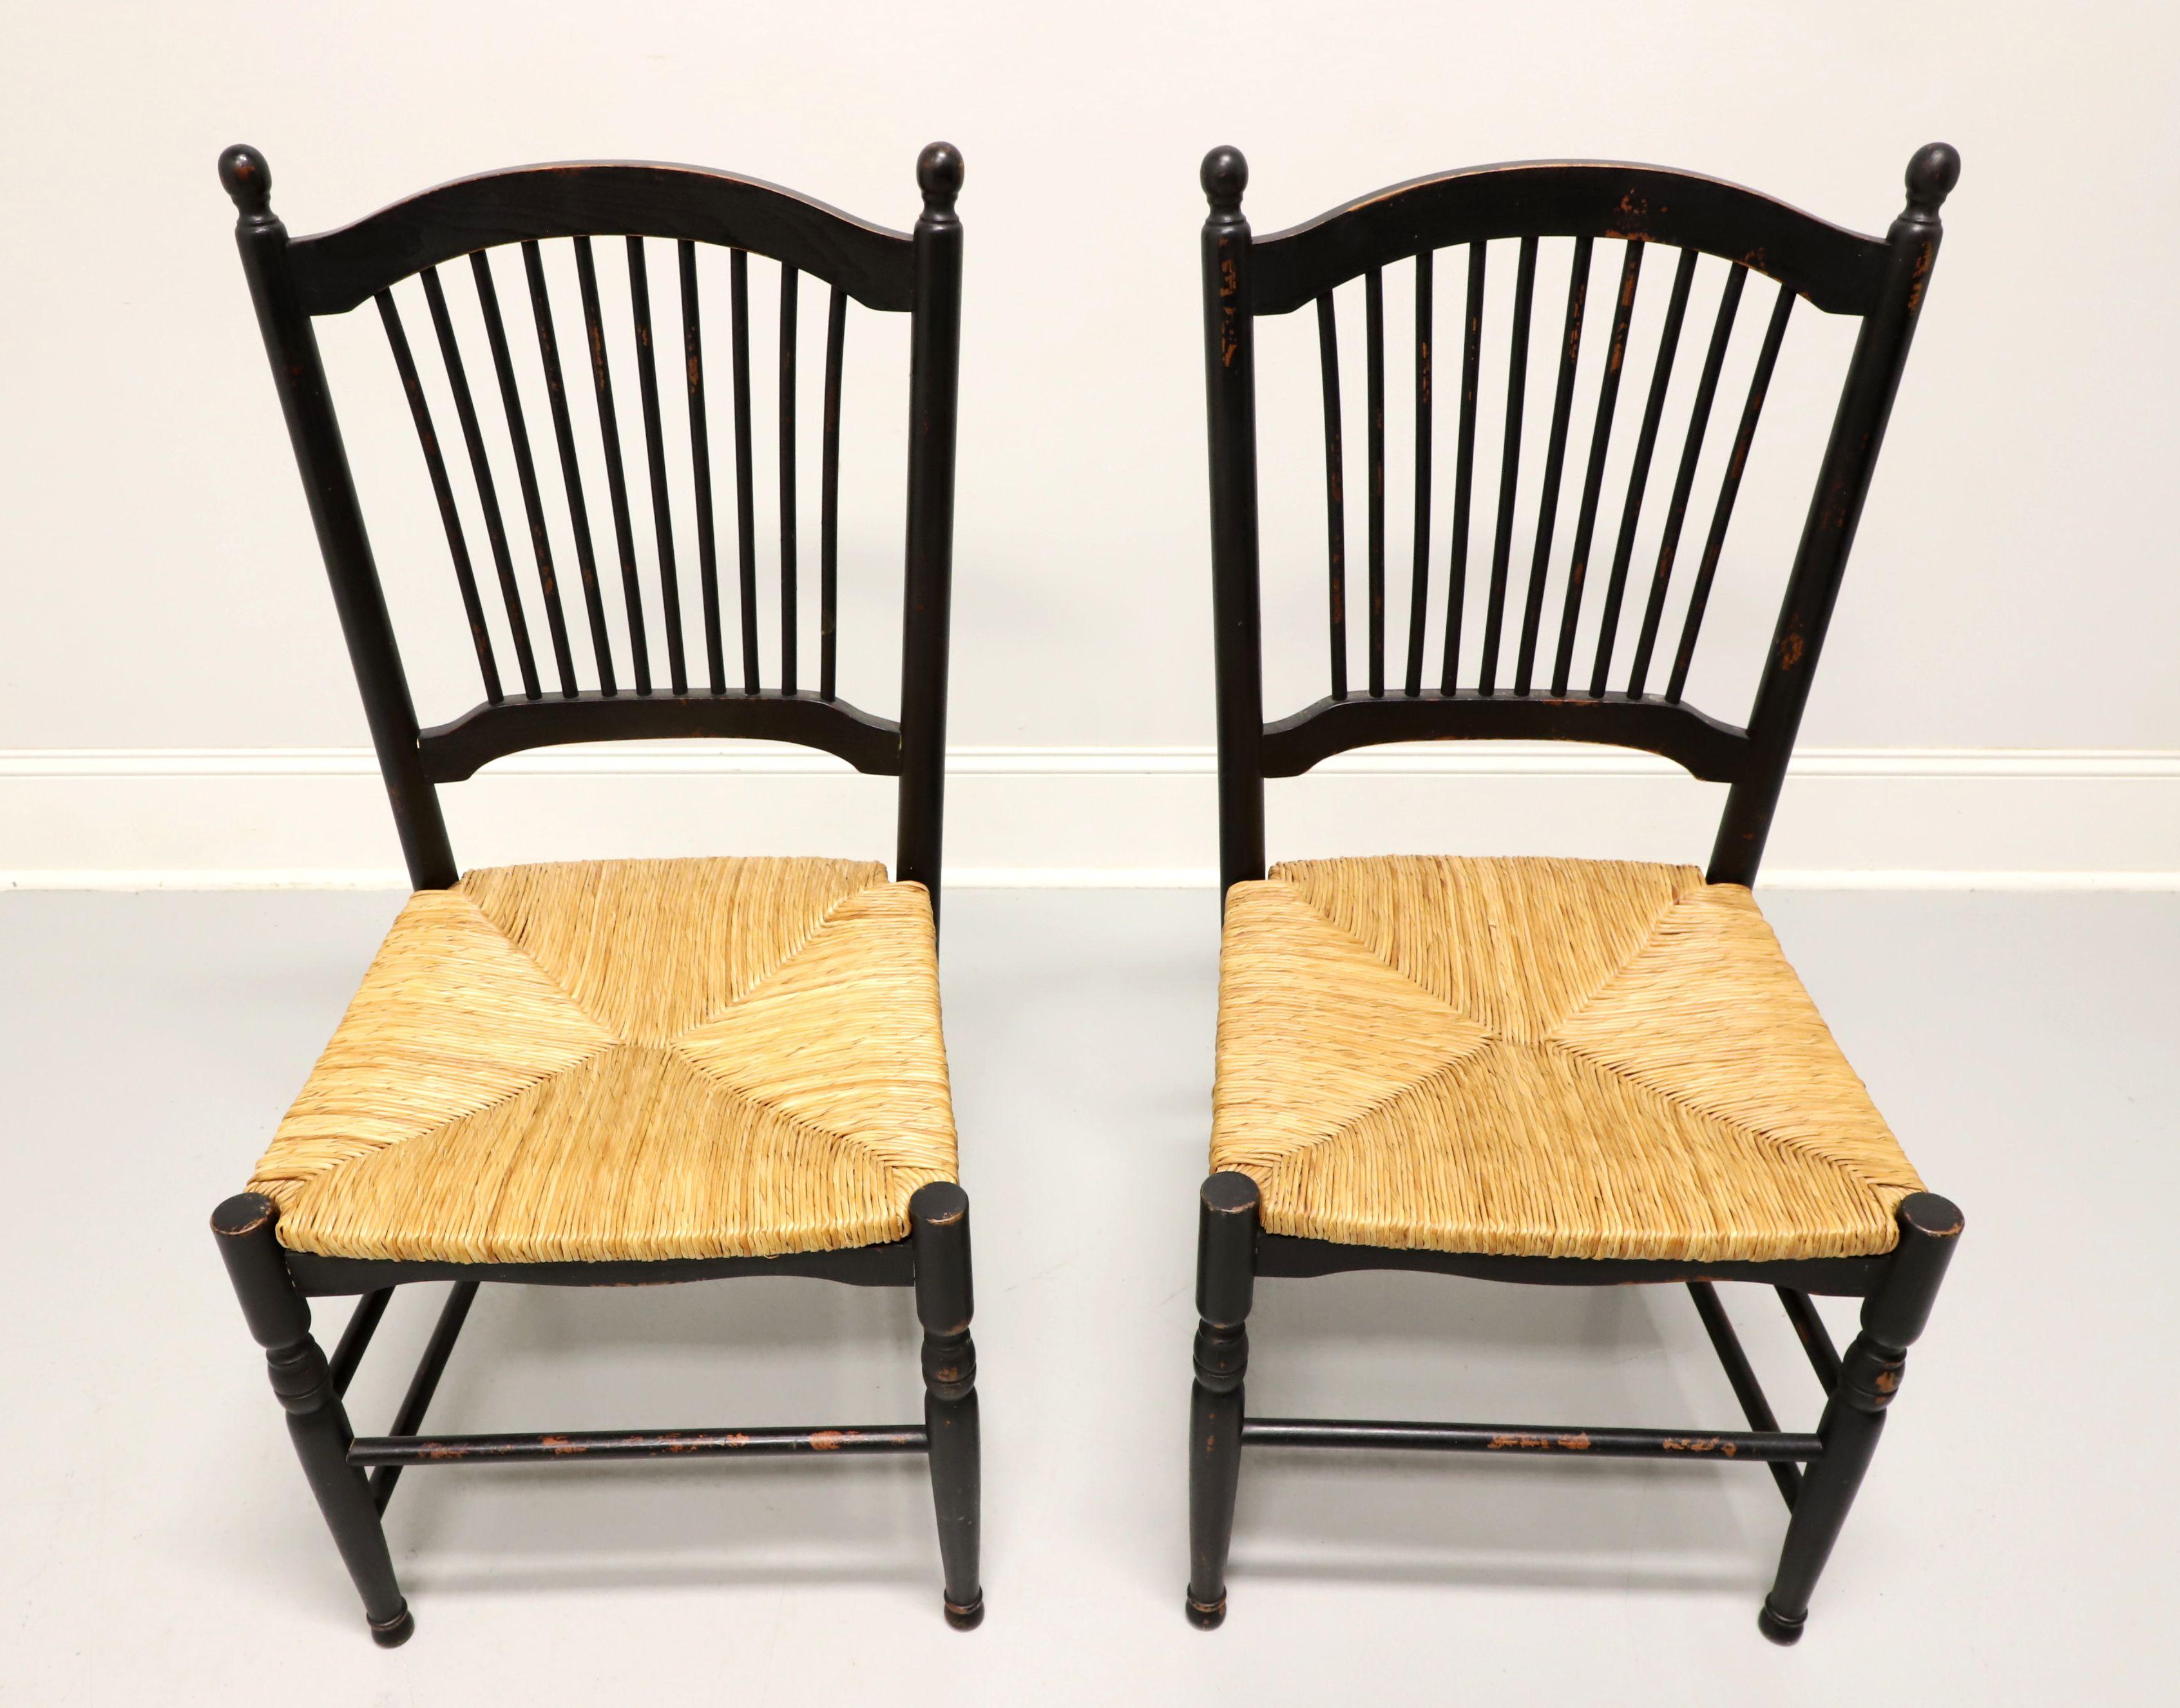 A pair of dining side chairs in the Cottage / Rustic style, unbranded. Solid hardwood painted black, distressed with touches of red, arched crest rail with spindle backs, rounded stiles capped with finial posts, rush seats, carved apron, turned